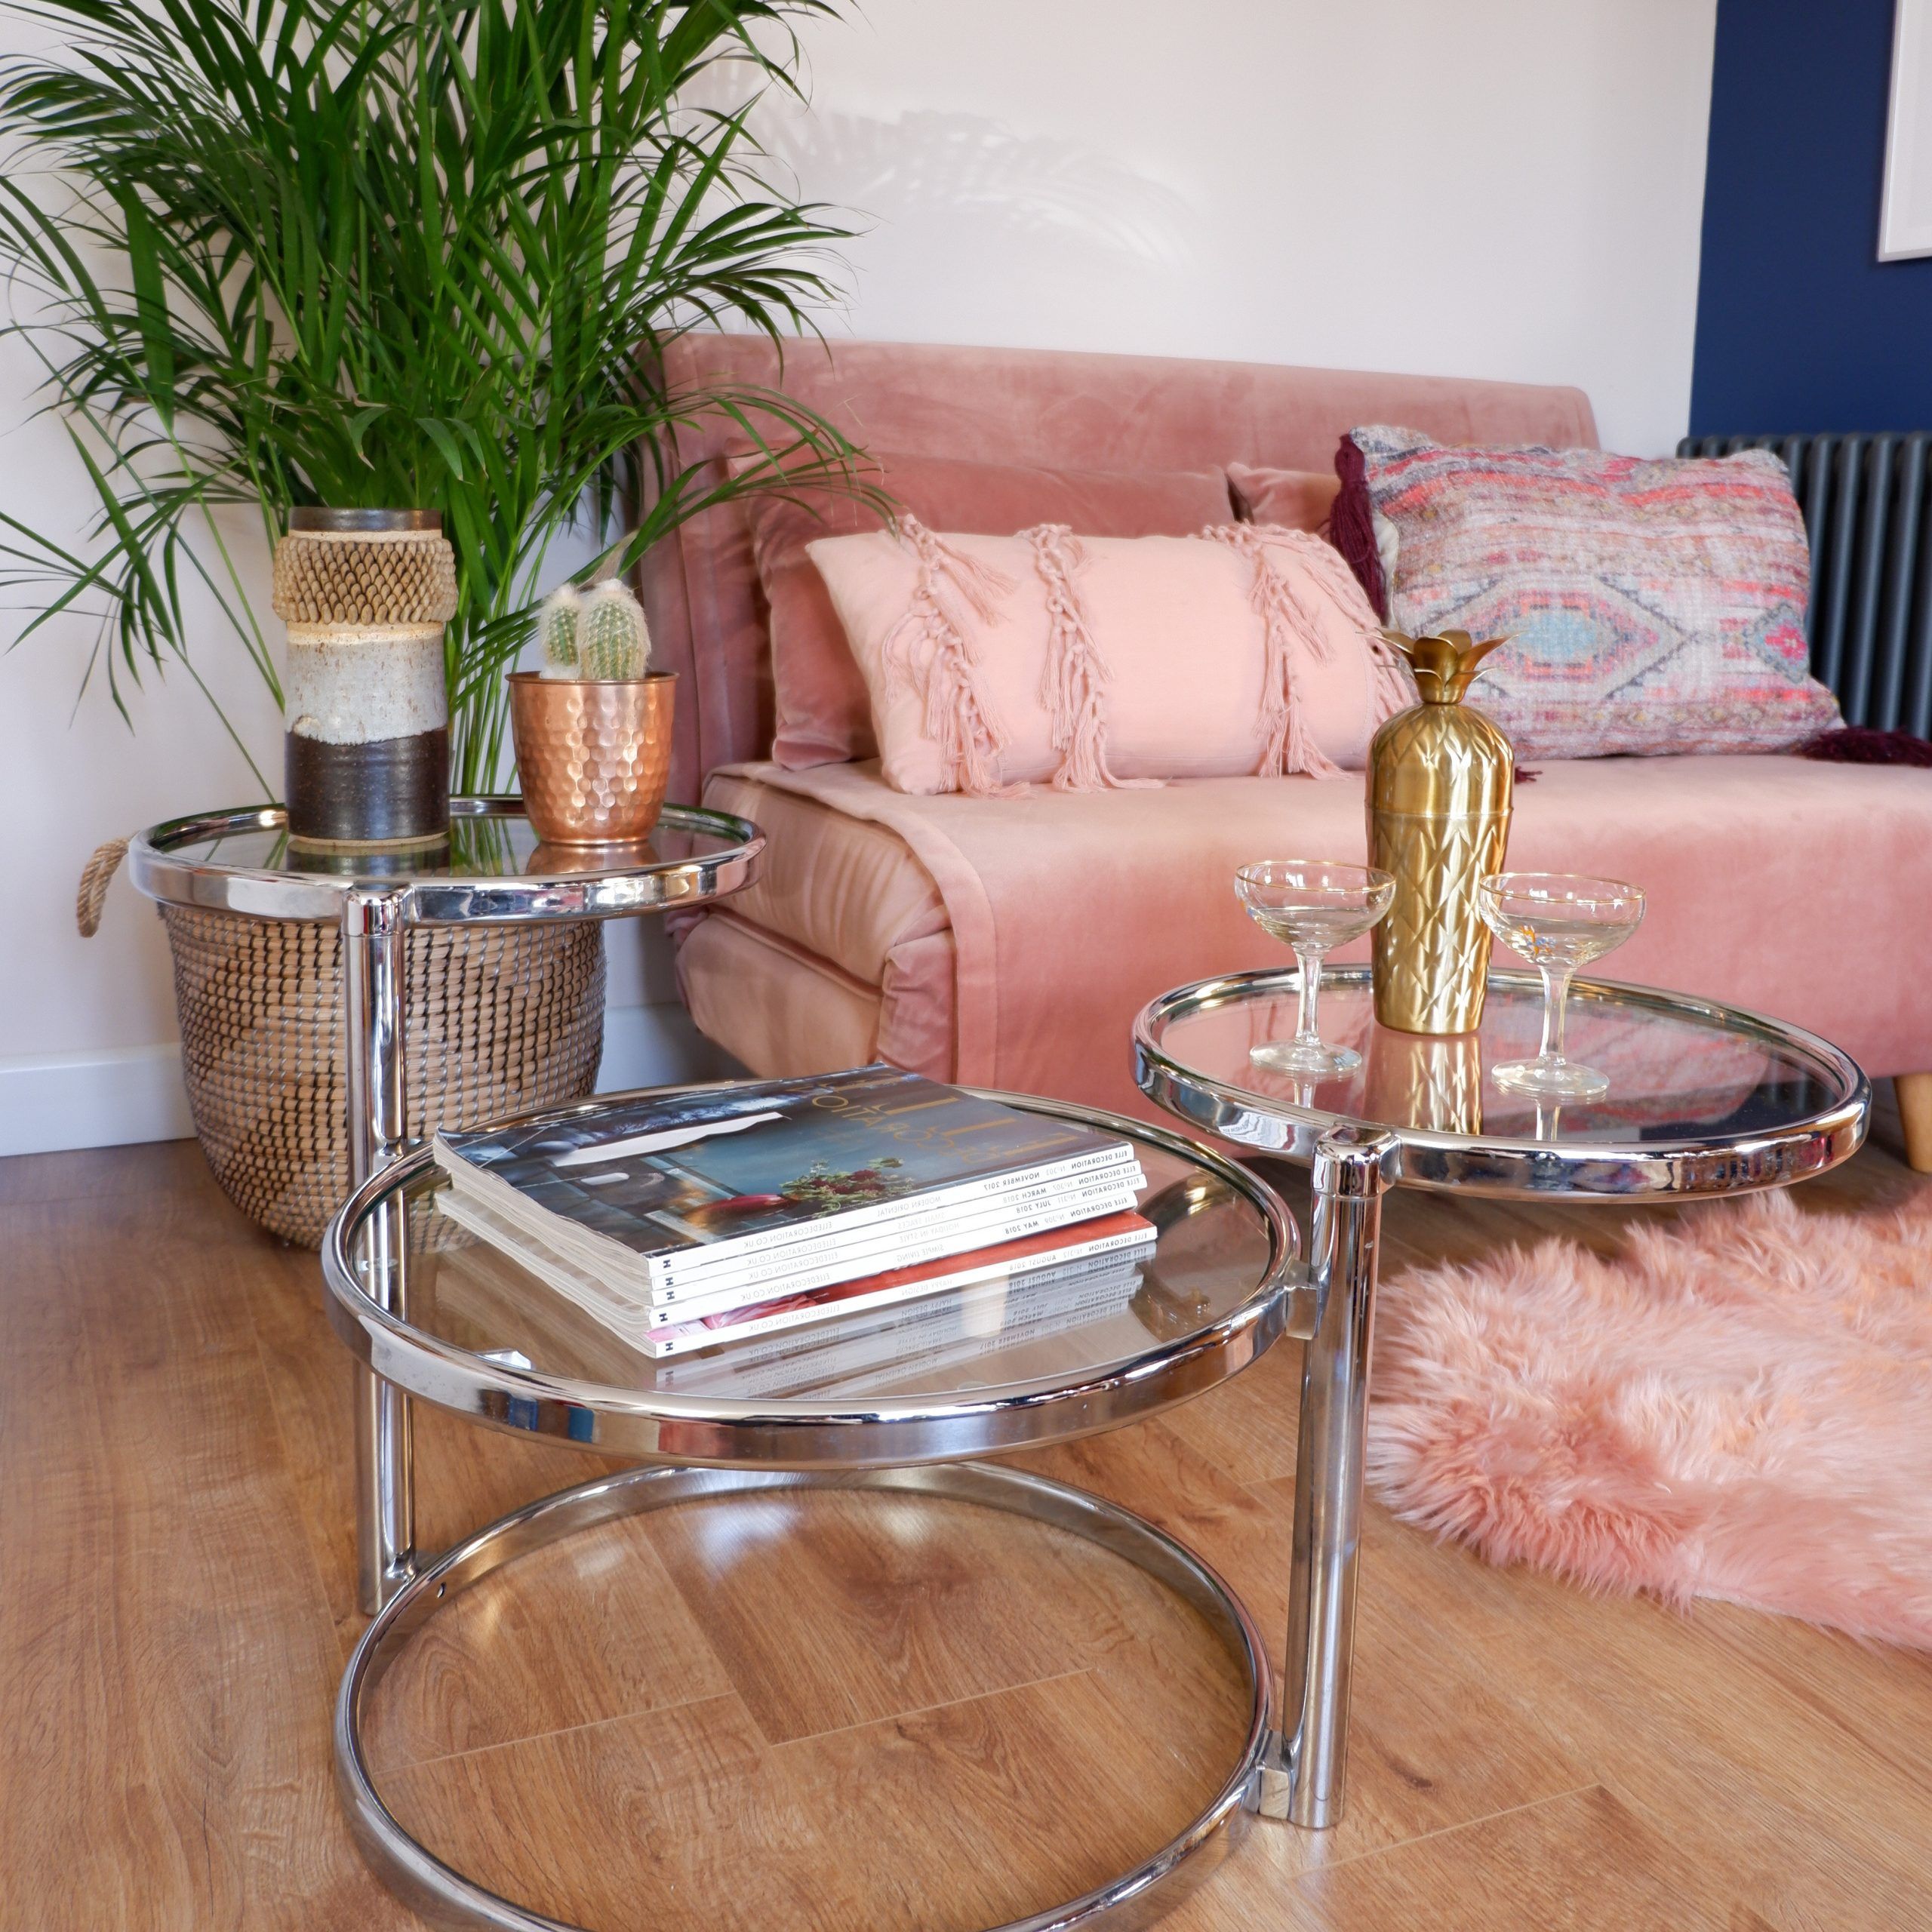 Most Recent Vintage 1970s Chrome And Glass Swivel 3 Tier Table Inside 3 Tier Coffee Tables (View 4 of 20)